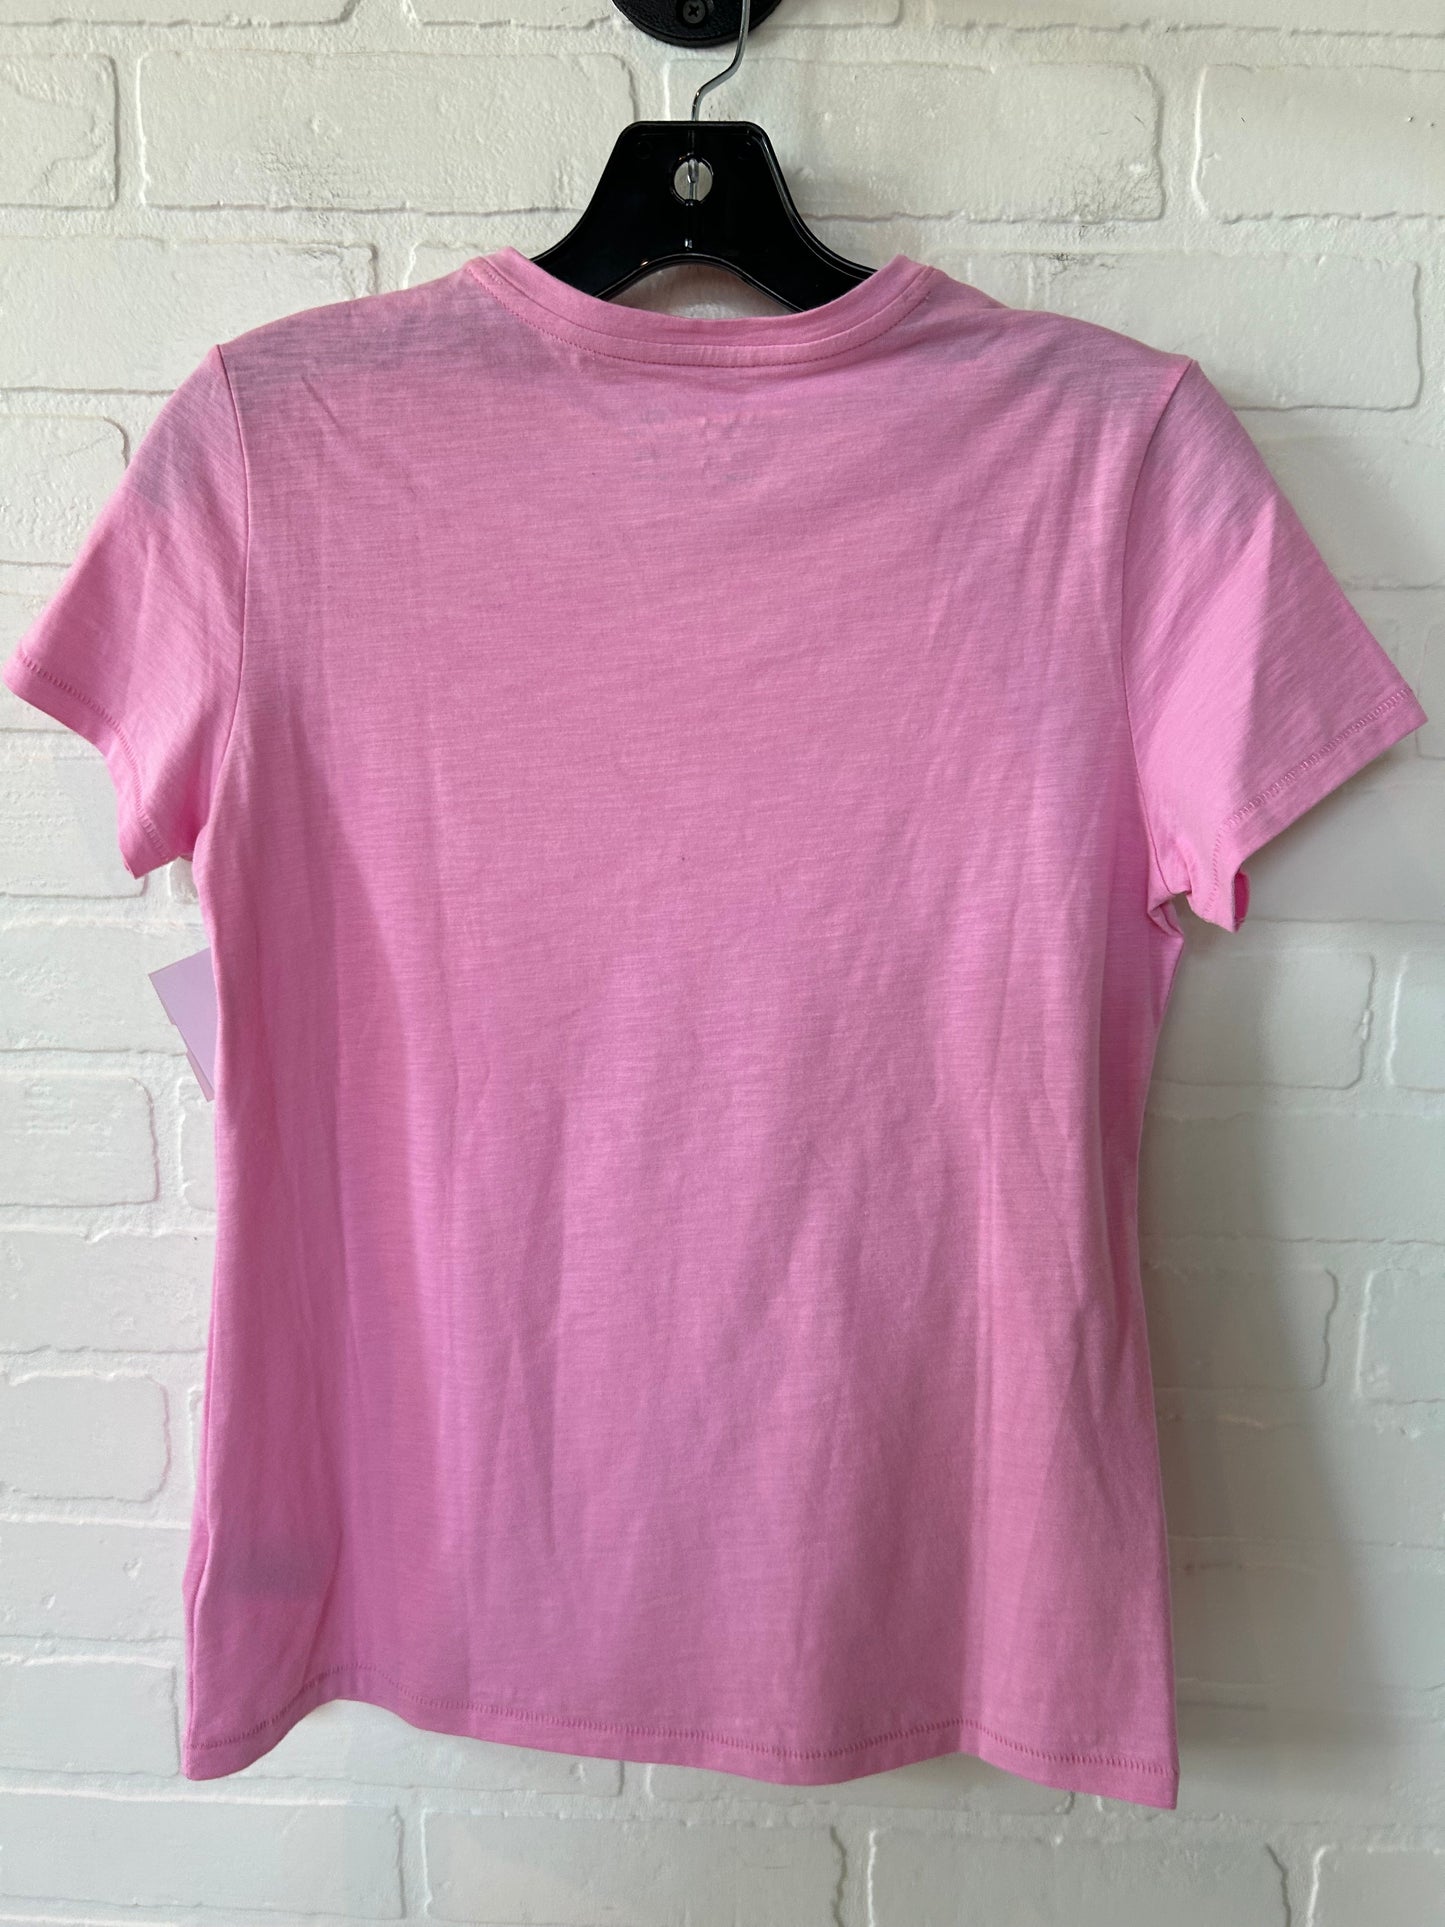 Pink Top Short Sleeve Basic Joie, Size Xs